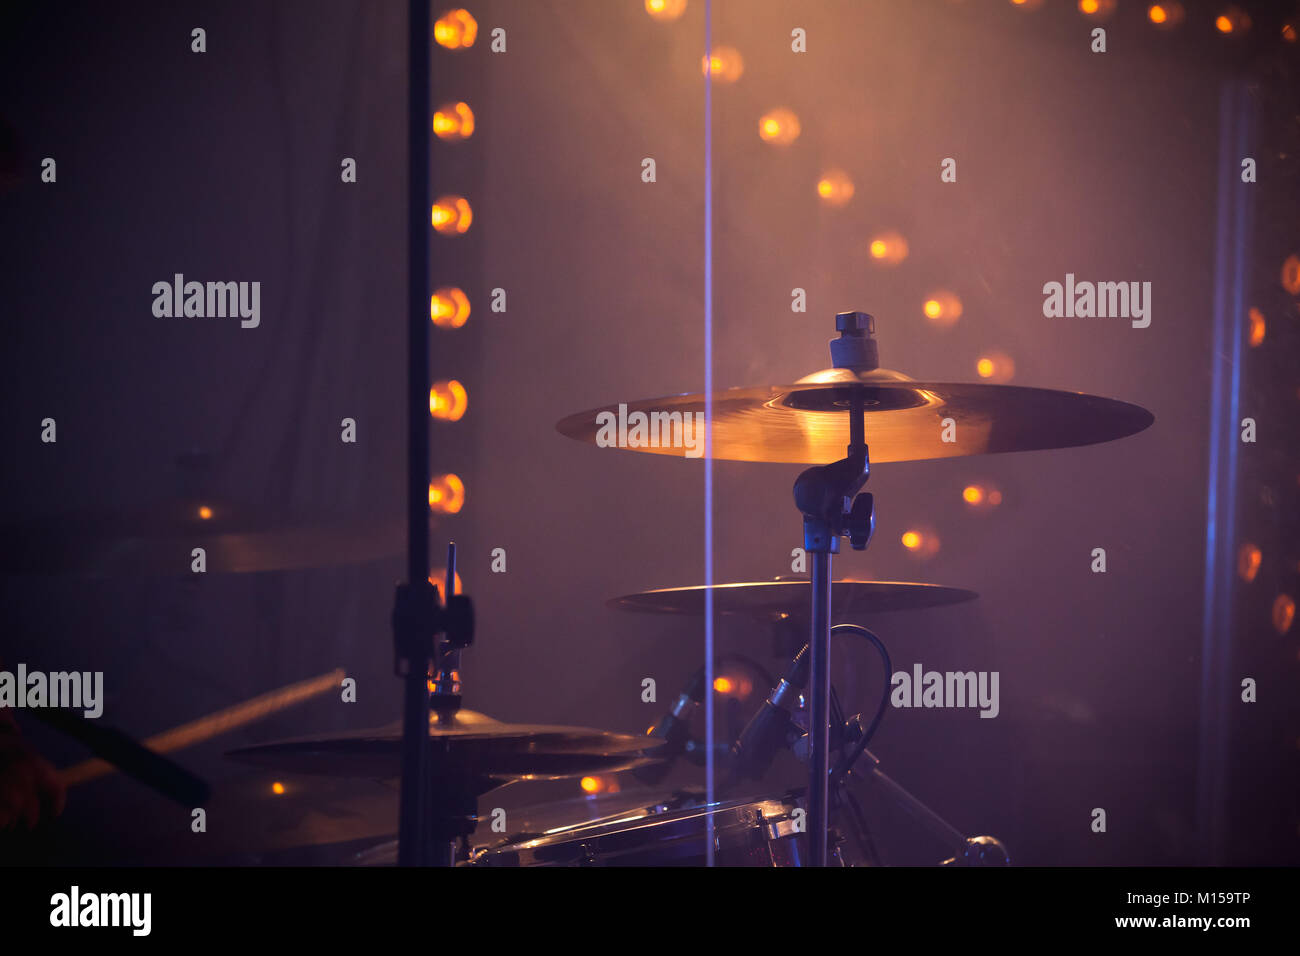 Live music photo, drum set with cymbals and stage lights on a background Stock Photo